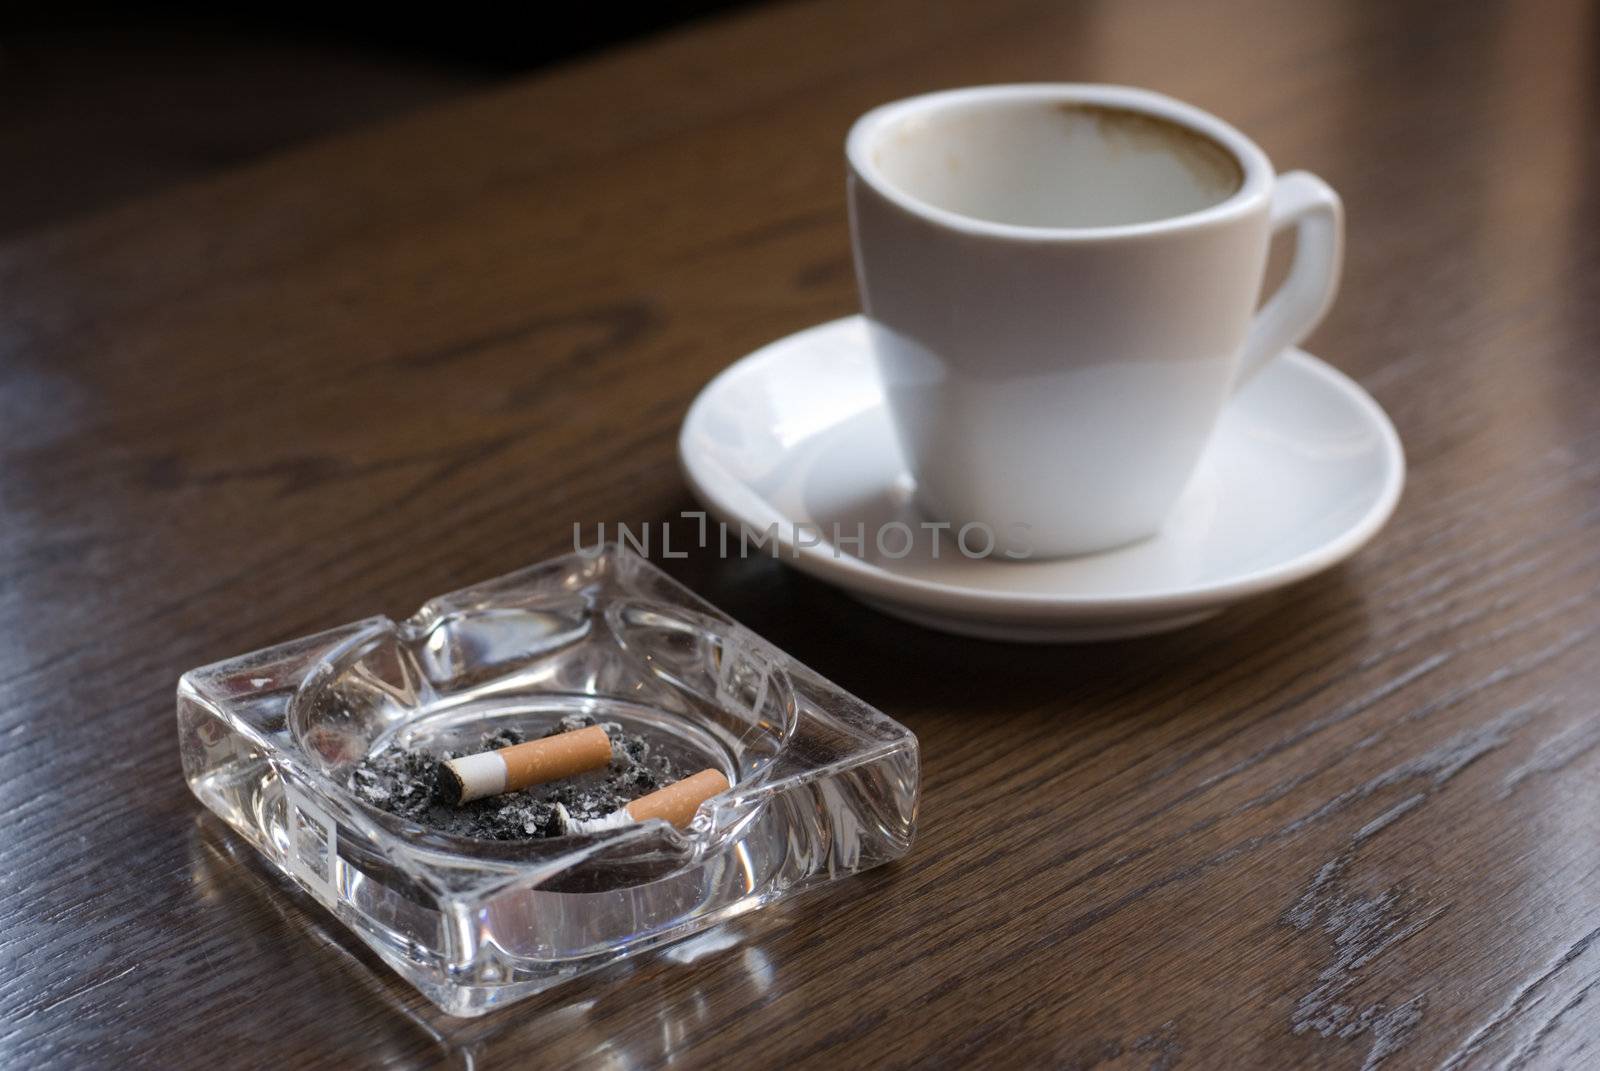 Ashtray and empty coffe cup on the cafe table. Shallow depth of field (focus on the cigarette butt).